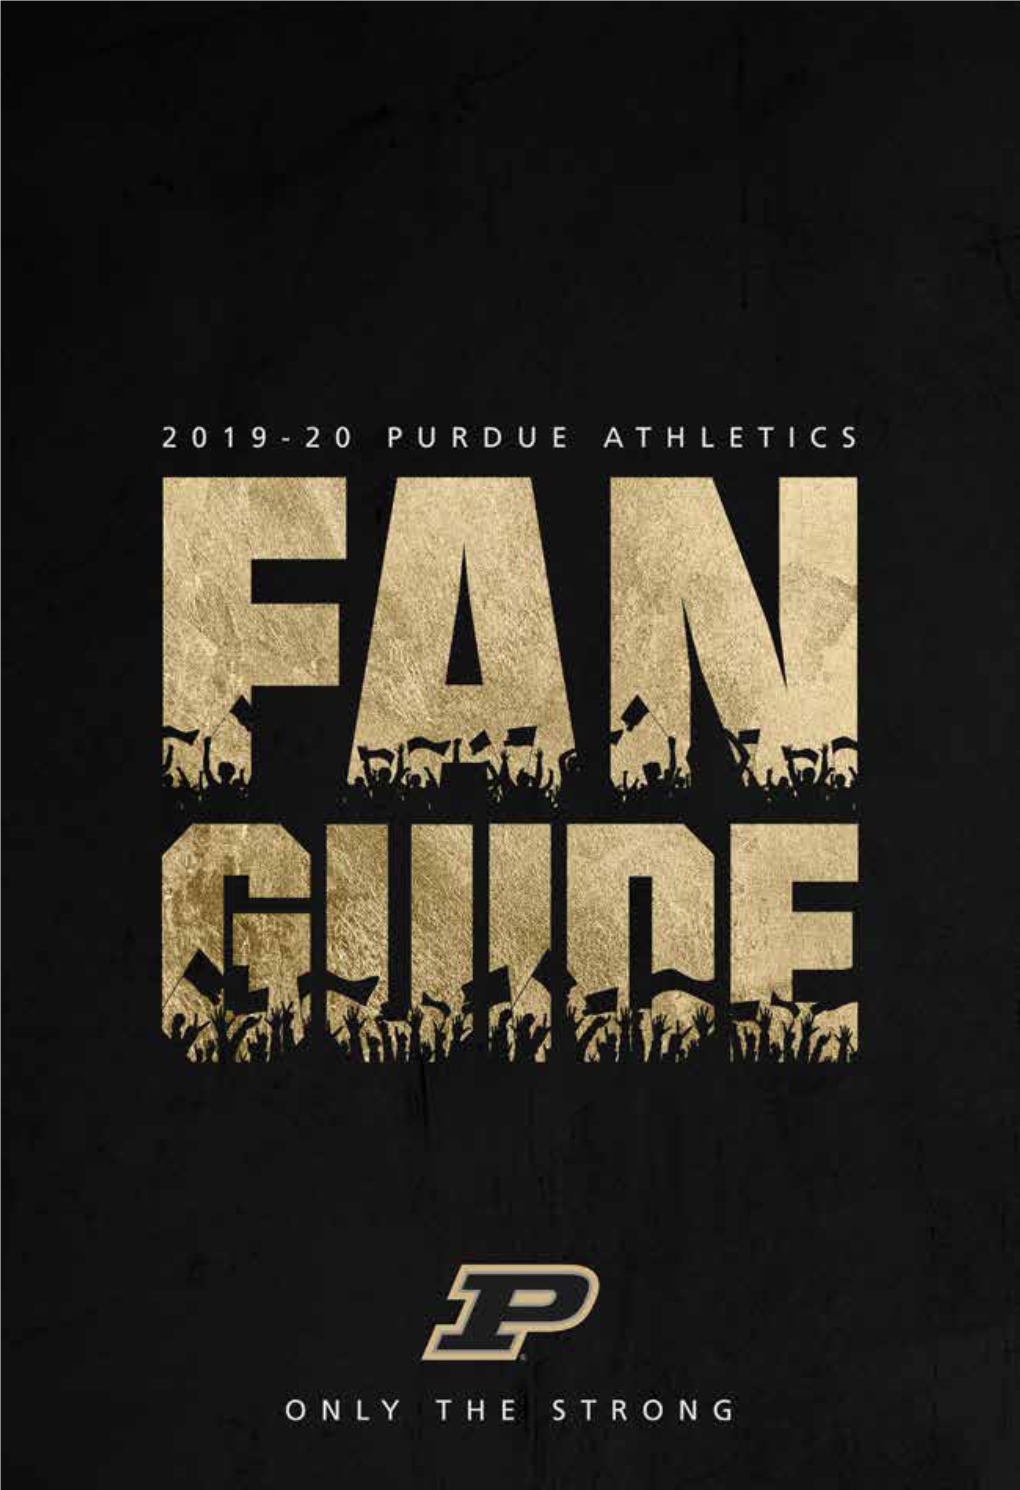 Boilermaker Fans Buy and Sell Tickets